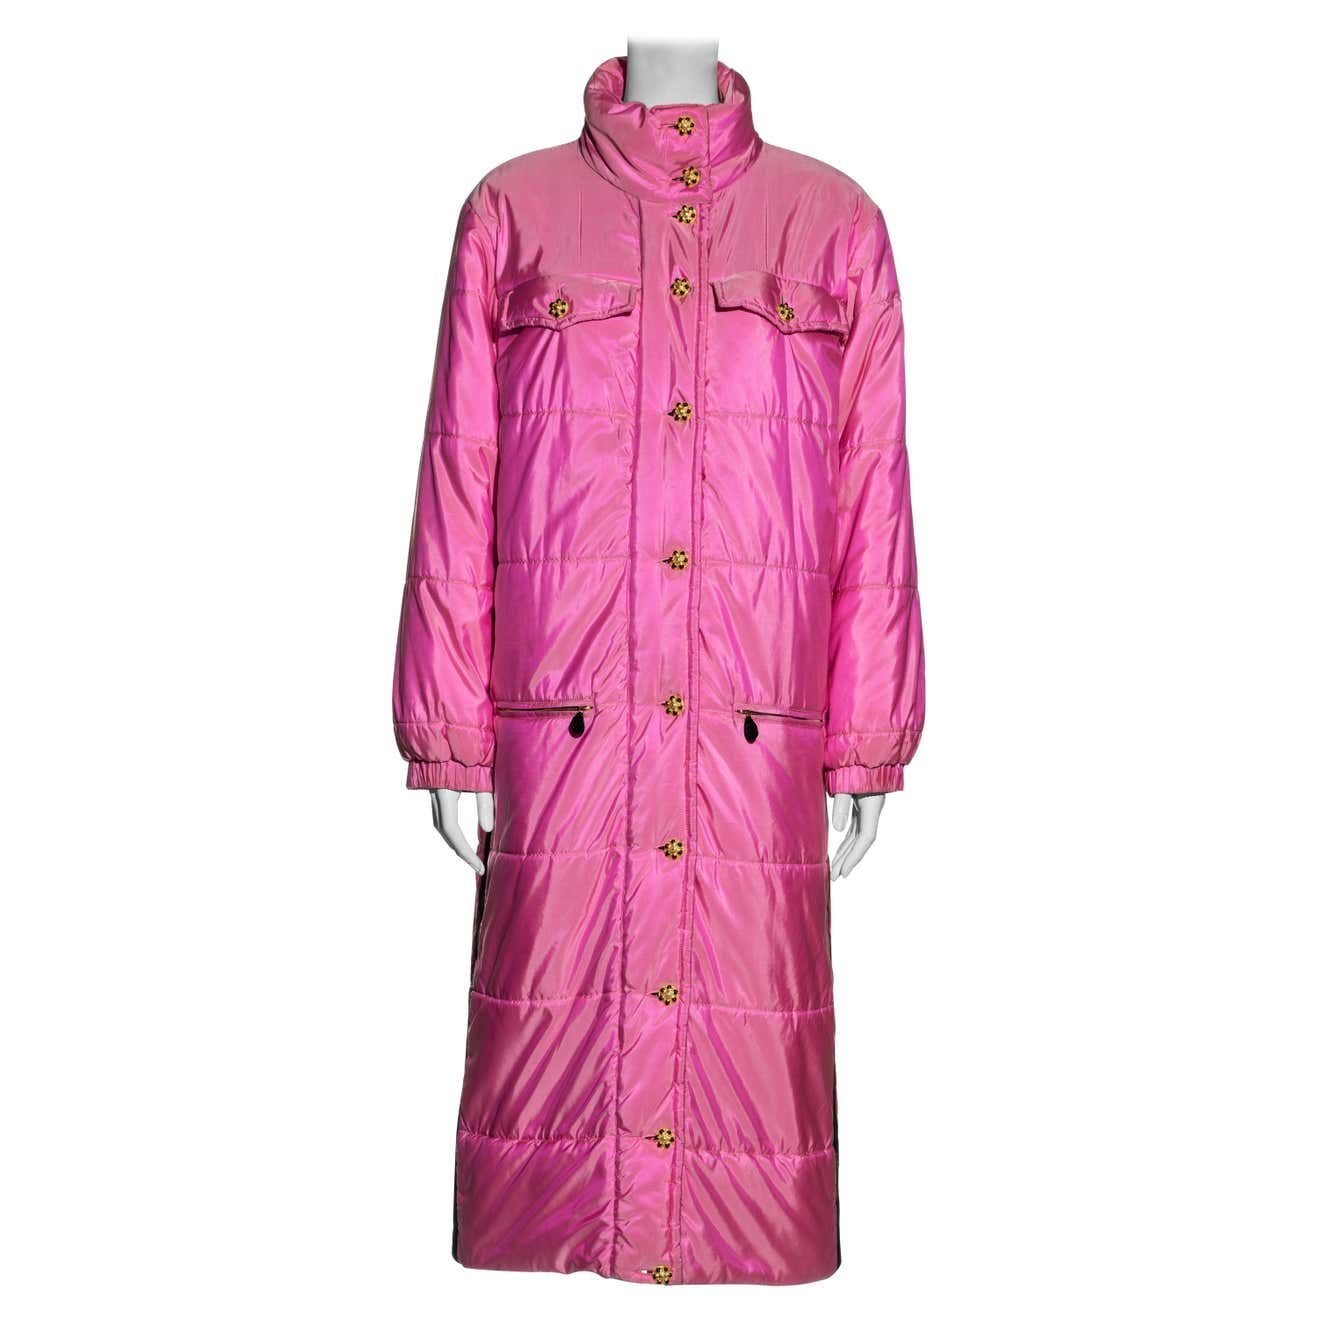 Chanel by Karl Lagerfeld Pink Silk Puffer Coat with Gripoix Buttons, Fall/Winter 1996